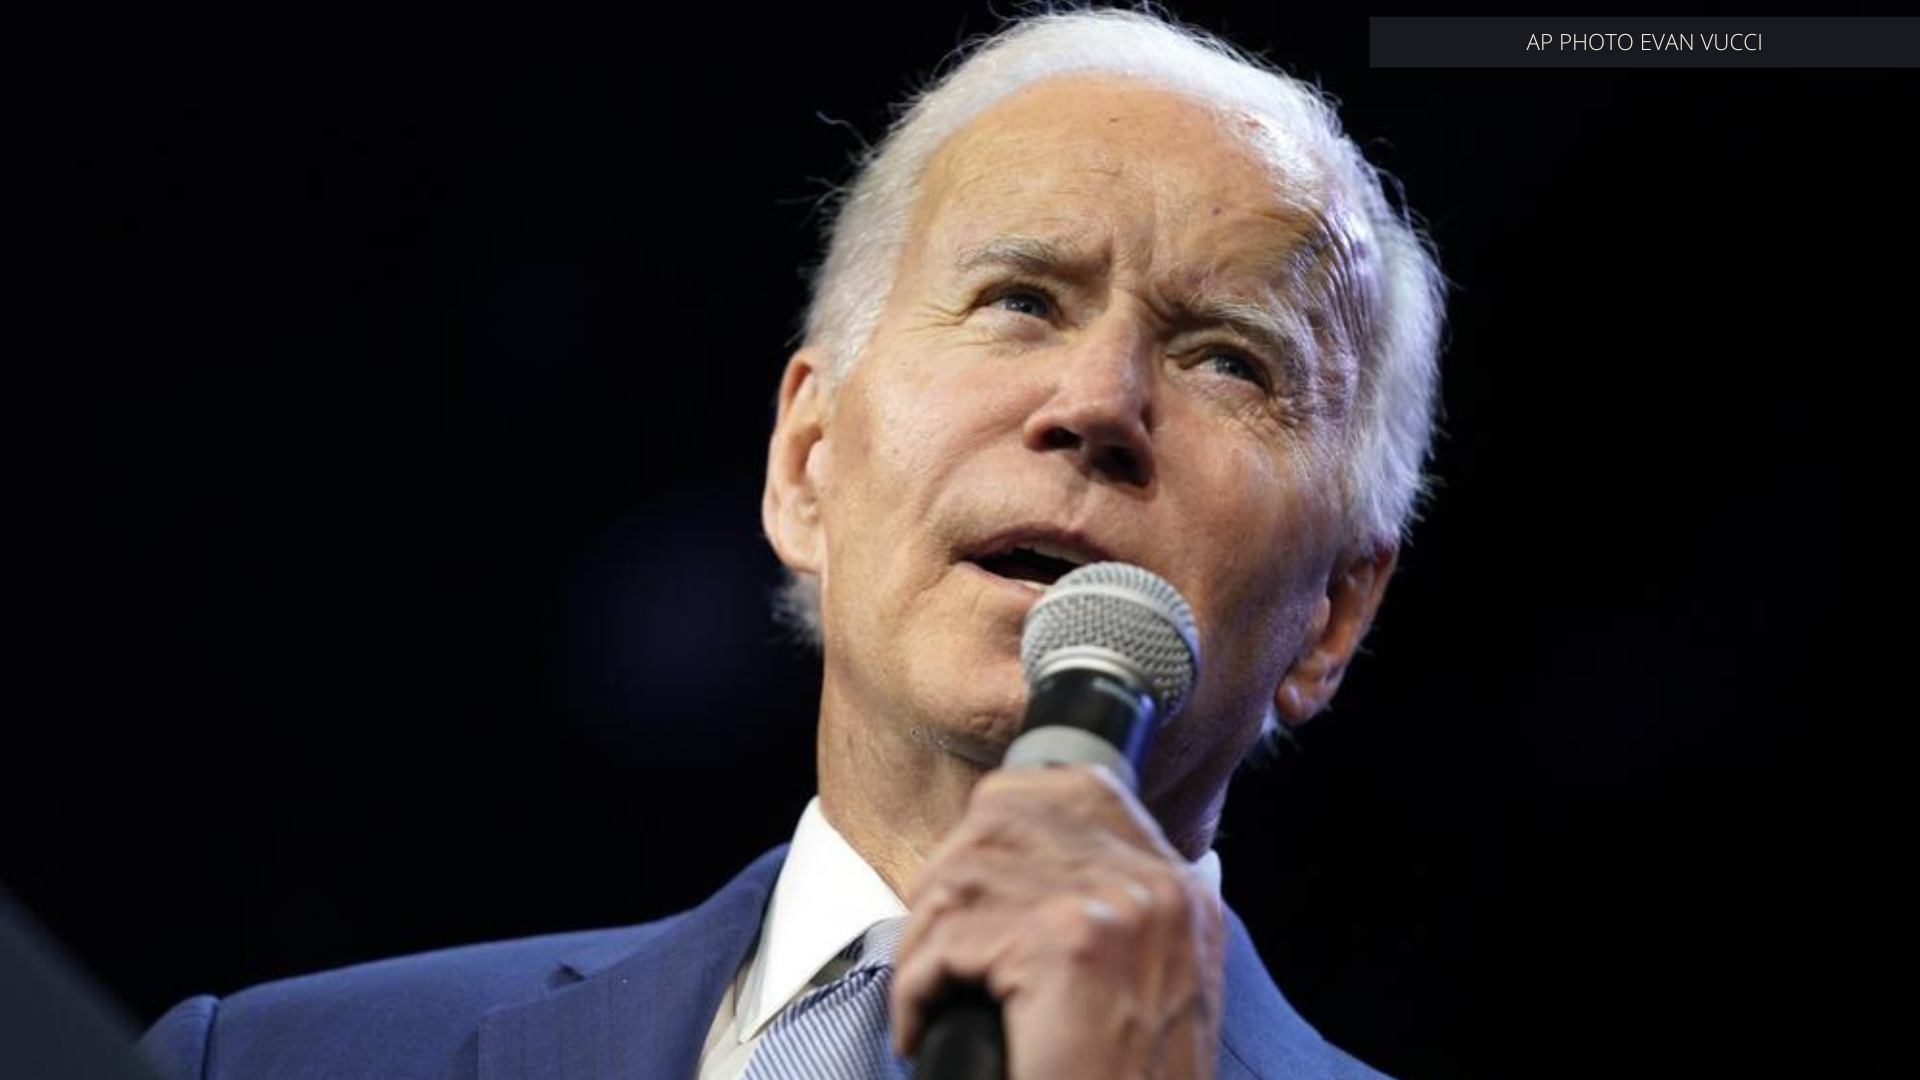 Biden Looks to Increase Oil Supplies Ahead of Midterm Voting